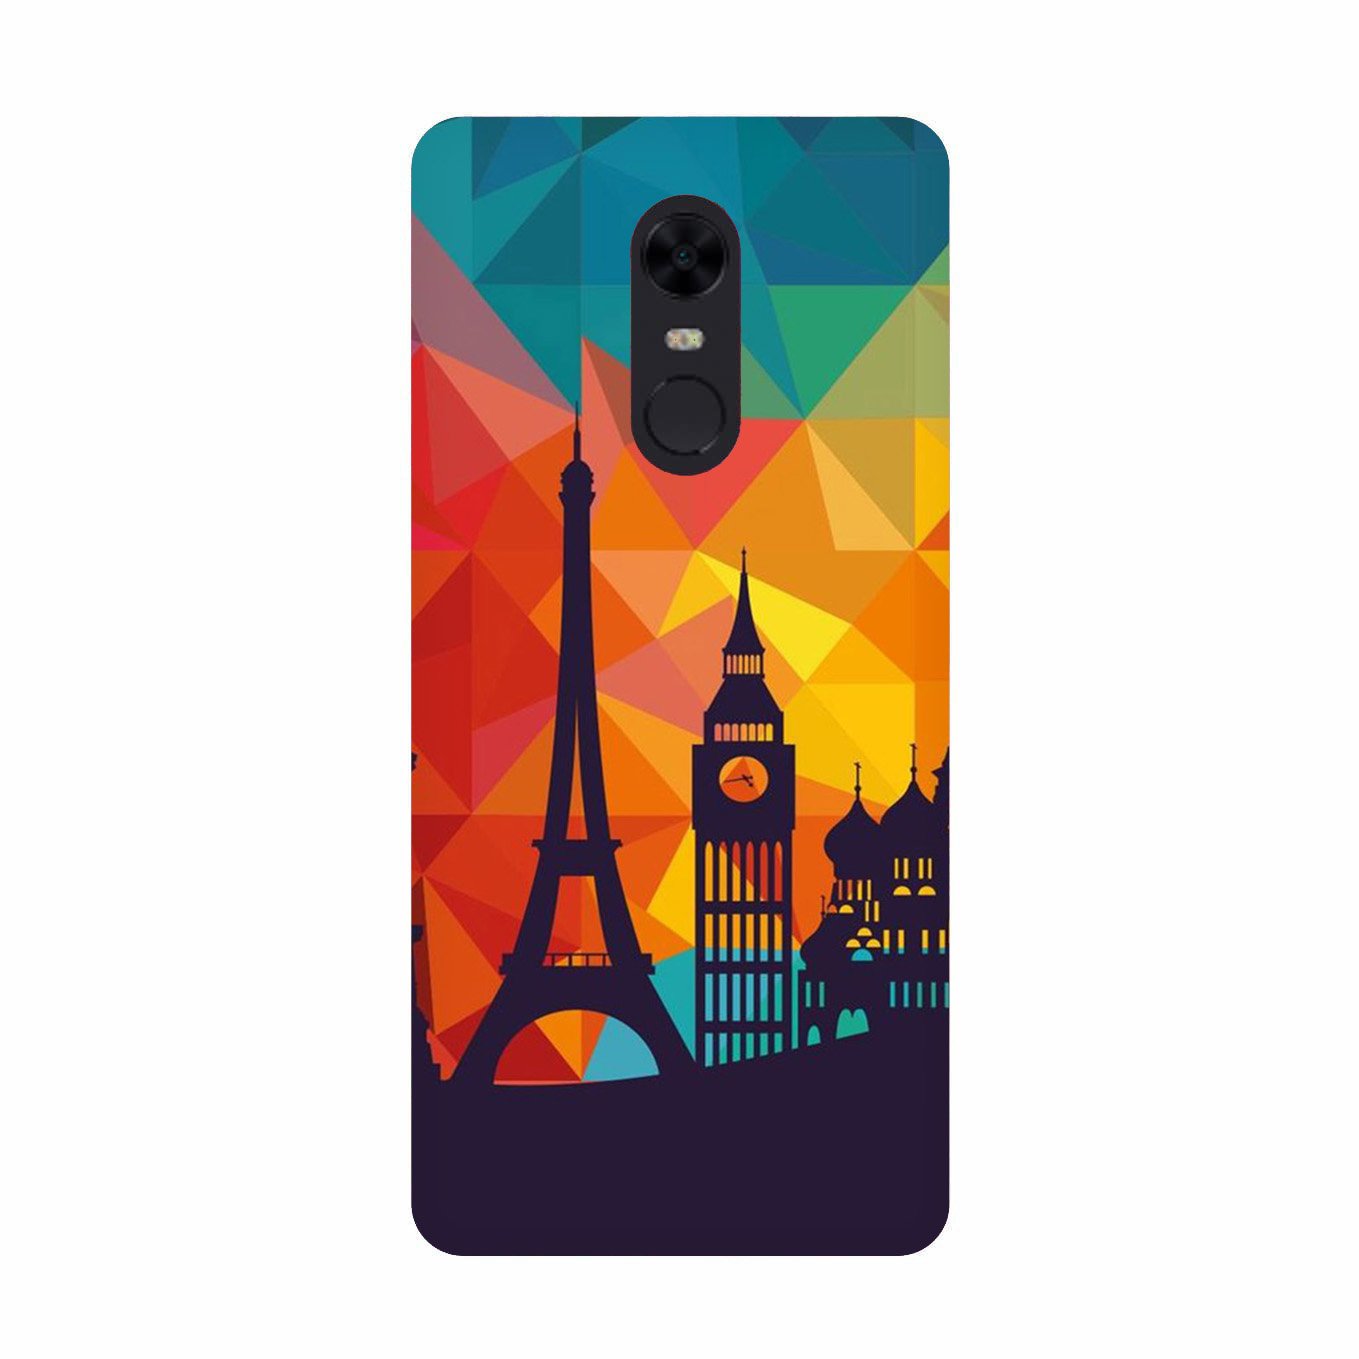 Eiffel Tower2 Case for Redmi Note 5